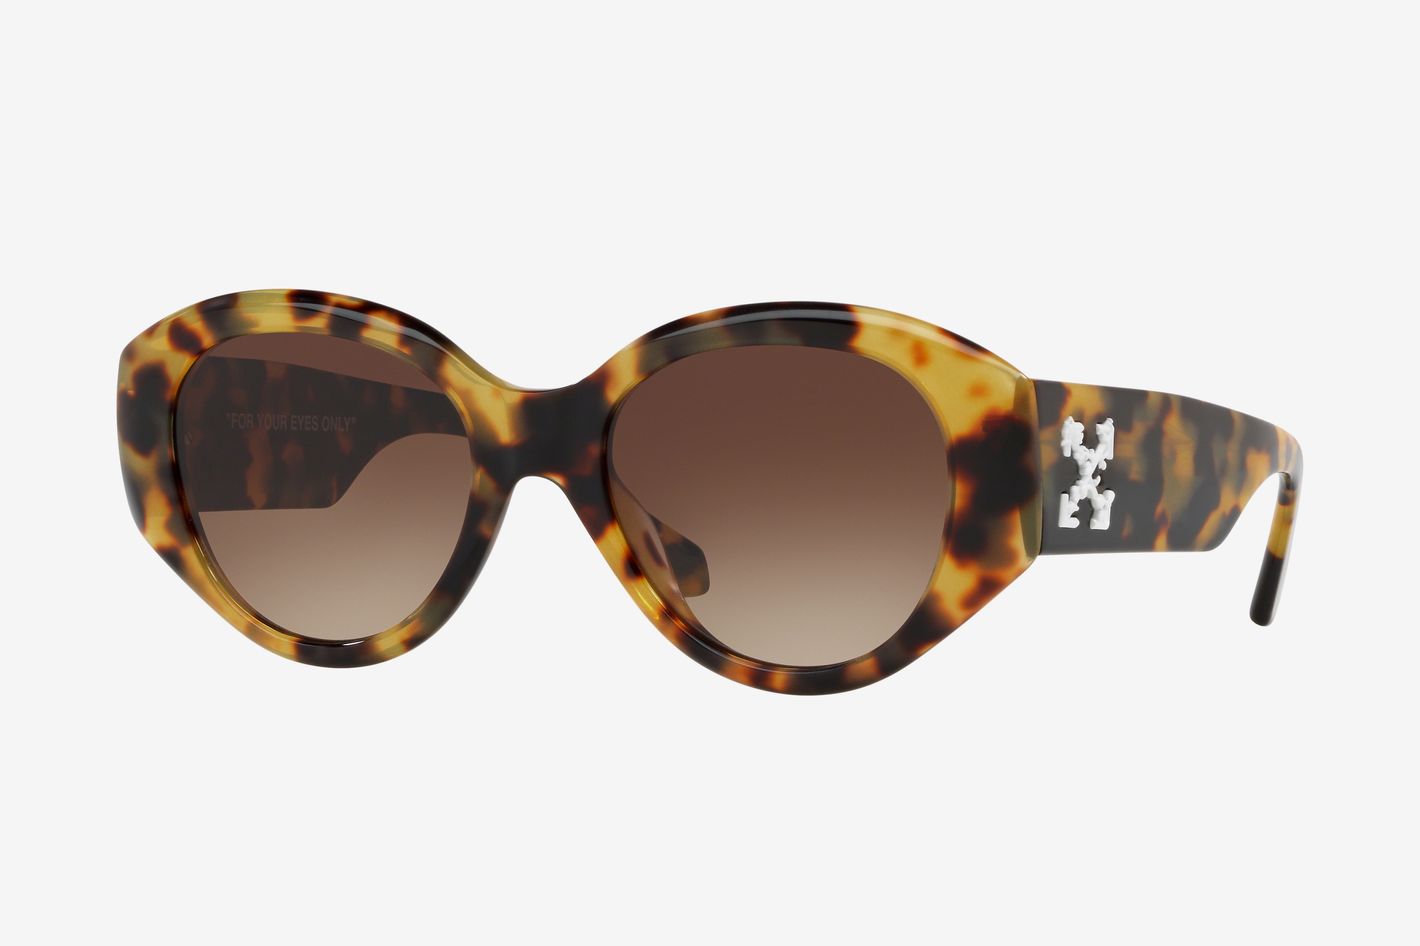 Off-White c/o Virgil Abloh x Sunglass Hut 'For Your Eyes Only